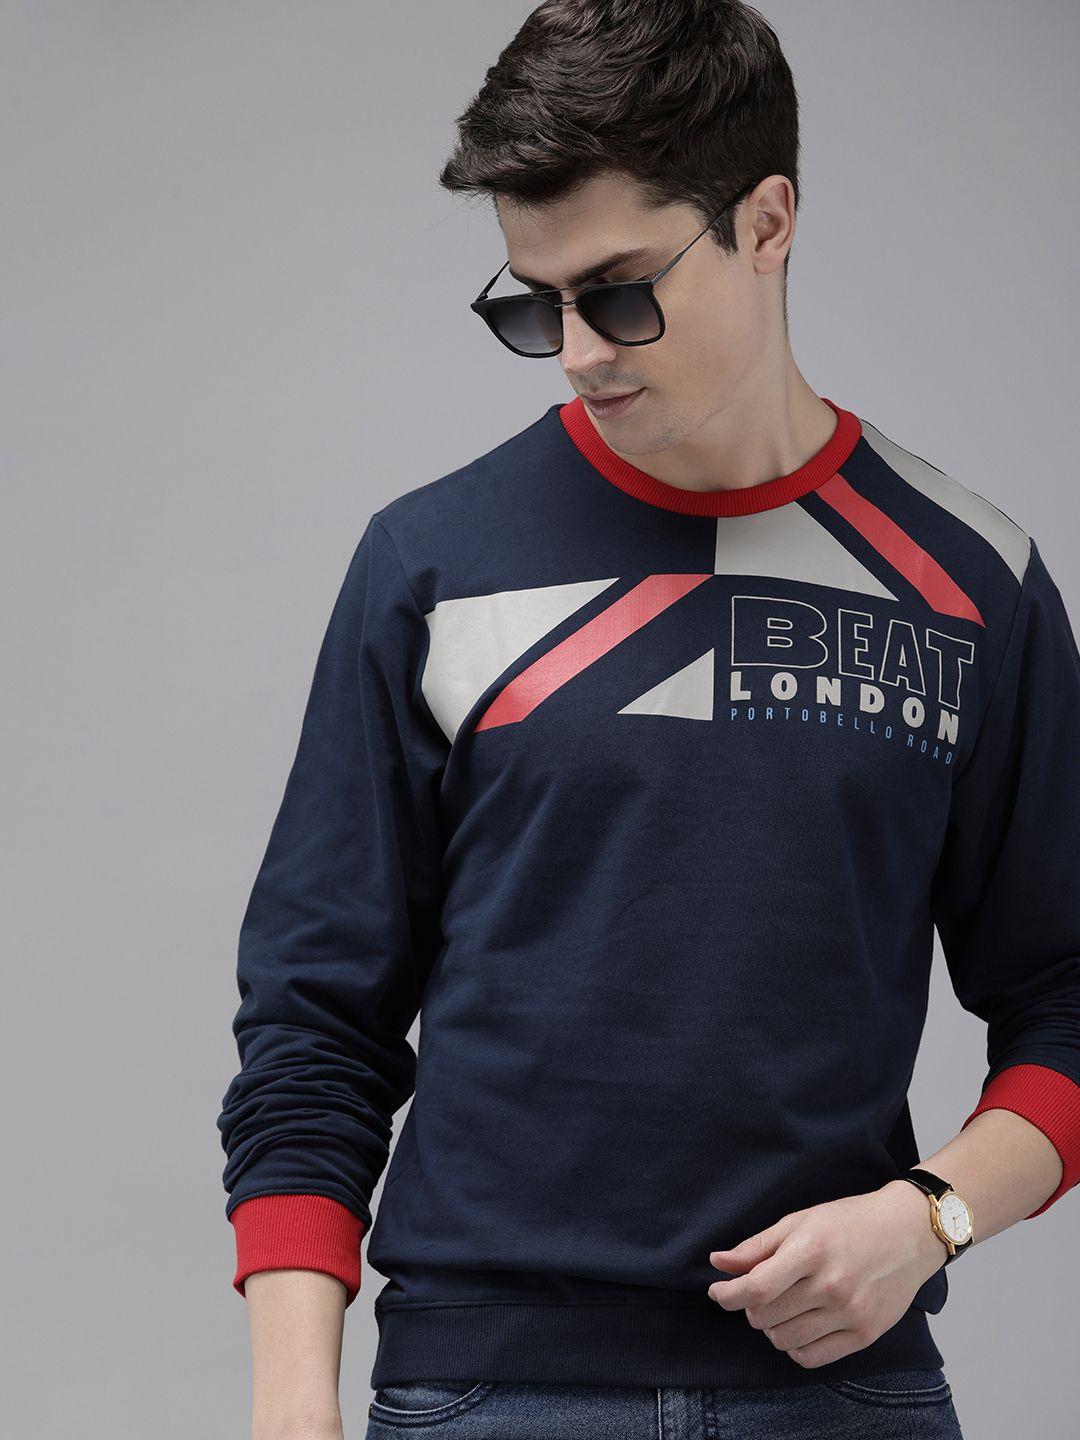 beat london by pepe jeans graphic printed pure cotton sweatshirt